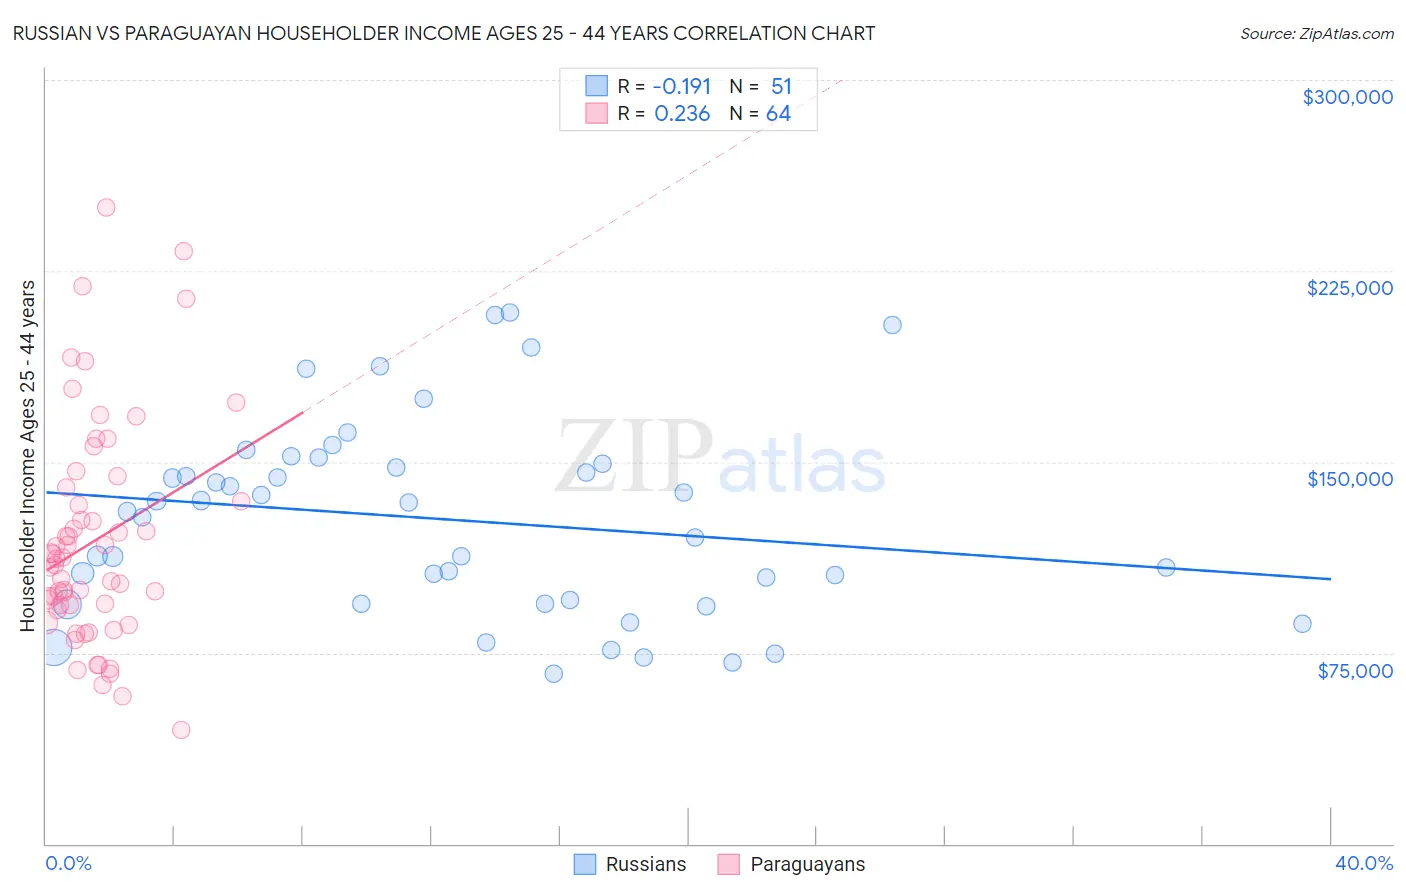 Russian vs Paraguayan Householder Income Ages 25 - 44 years